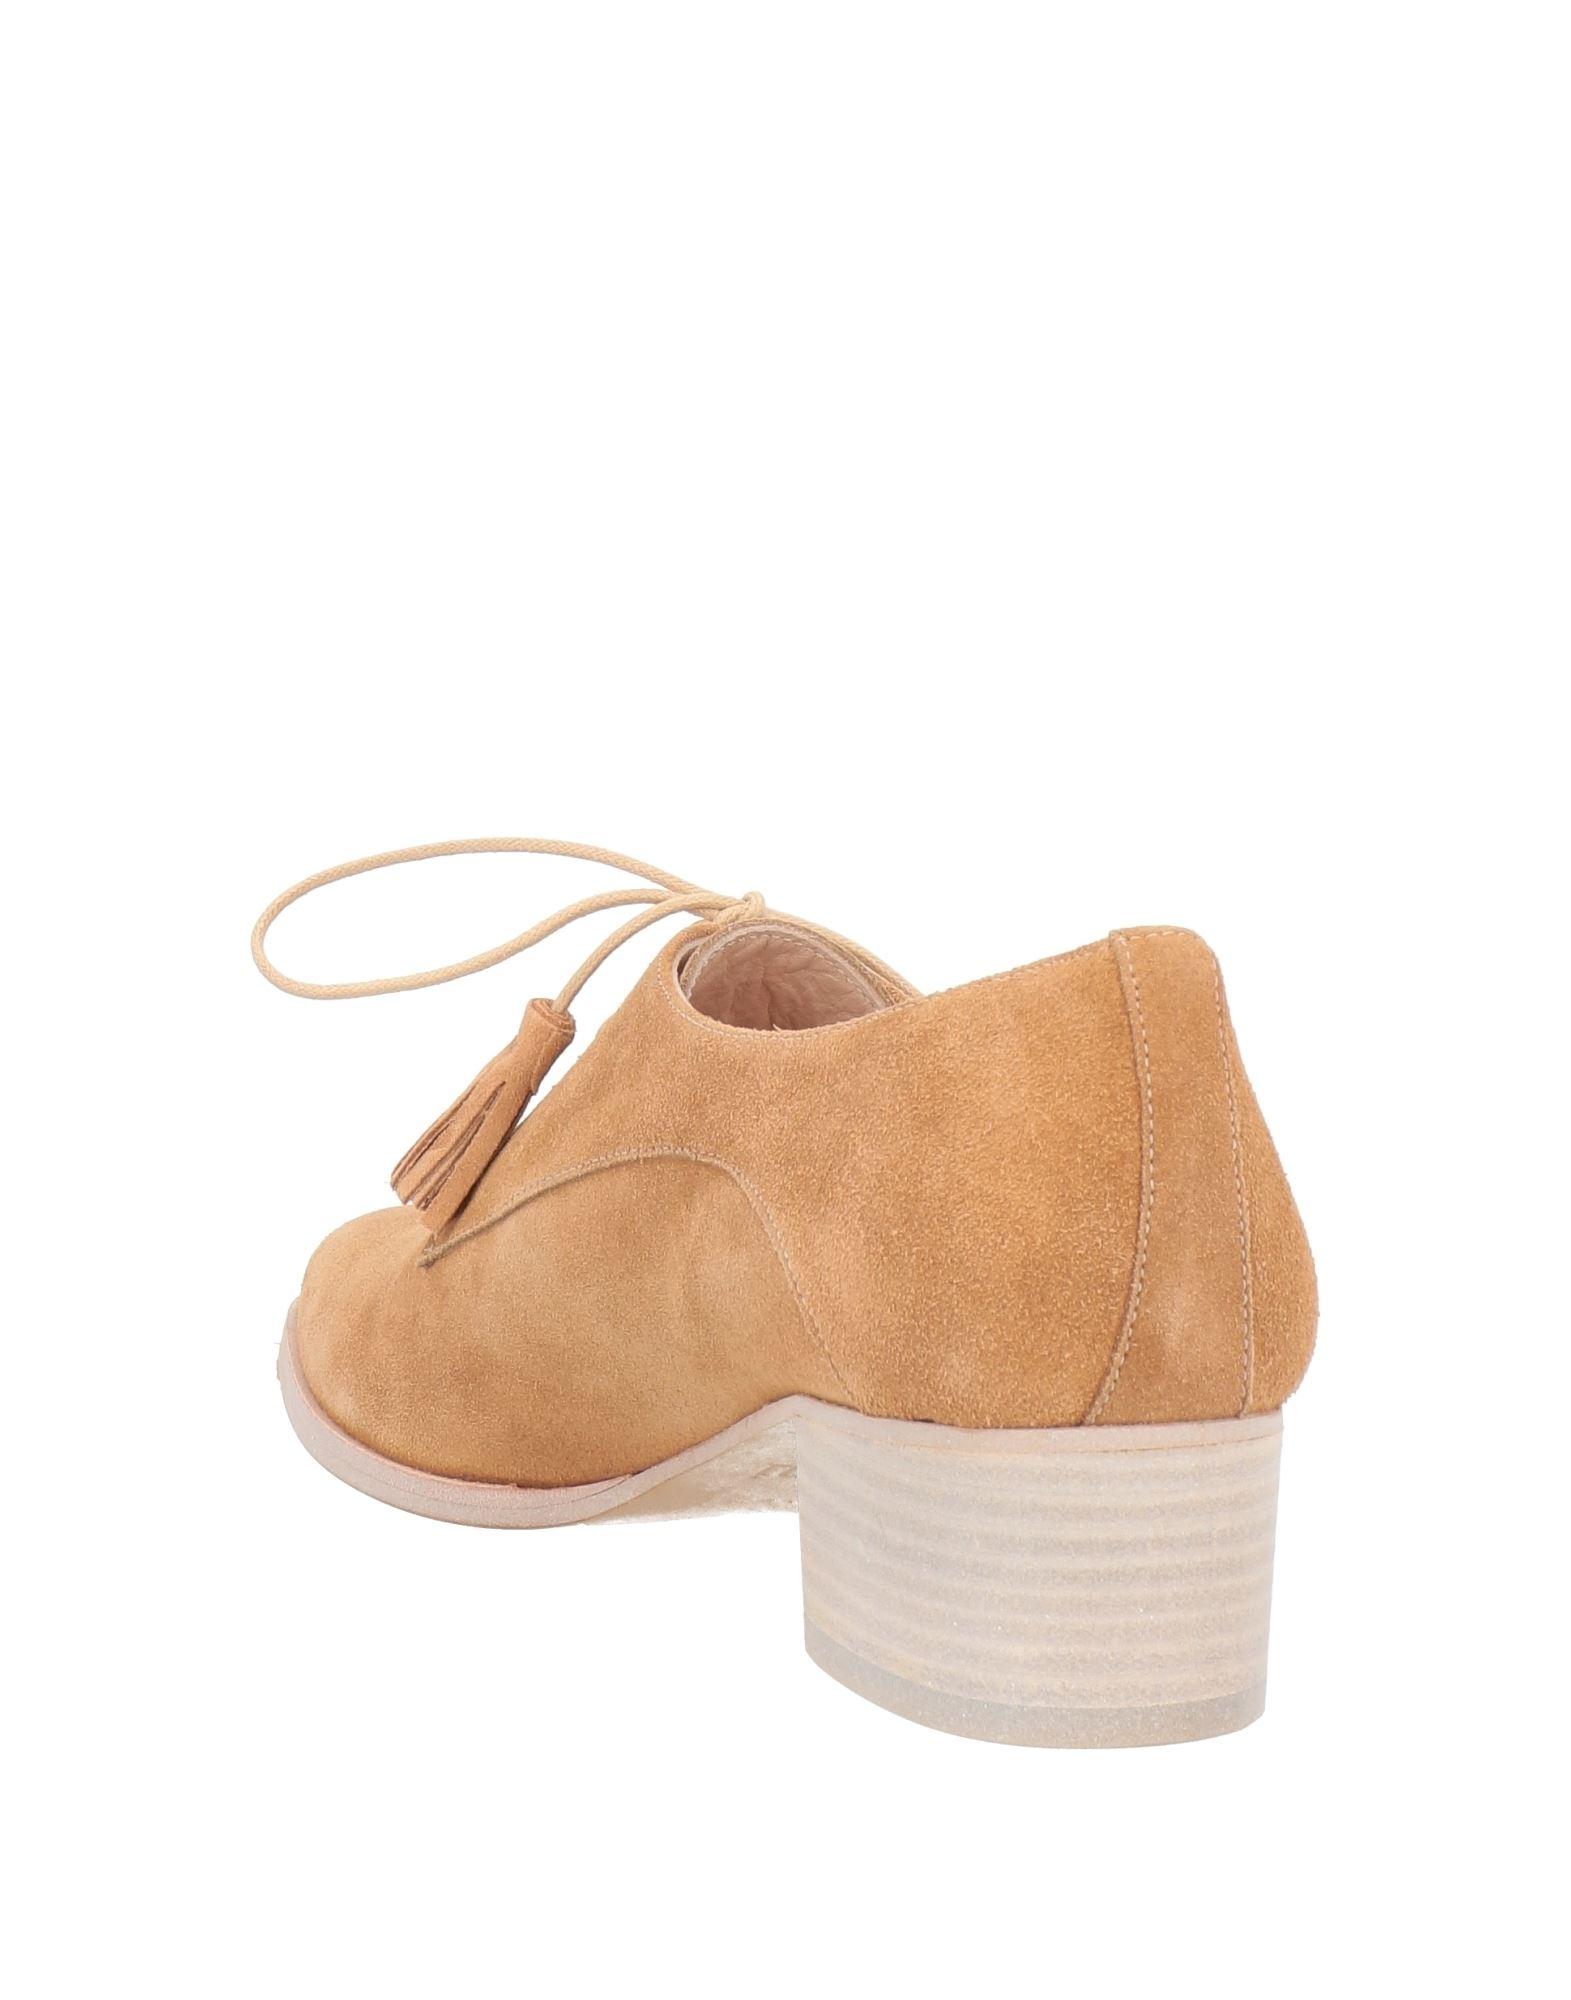 Pertini Lace-up Shoes in Natural | Lyst